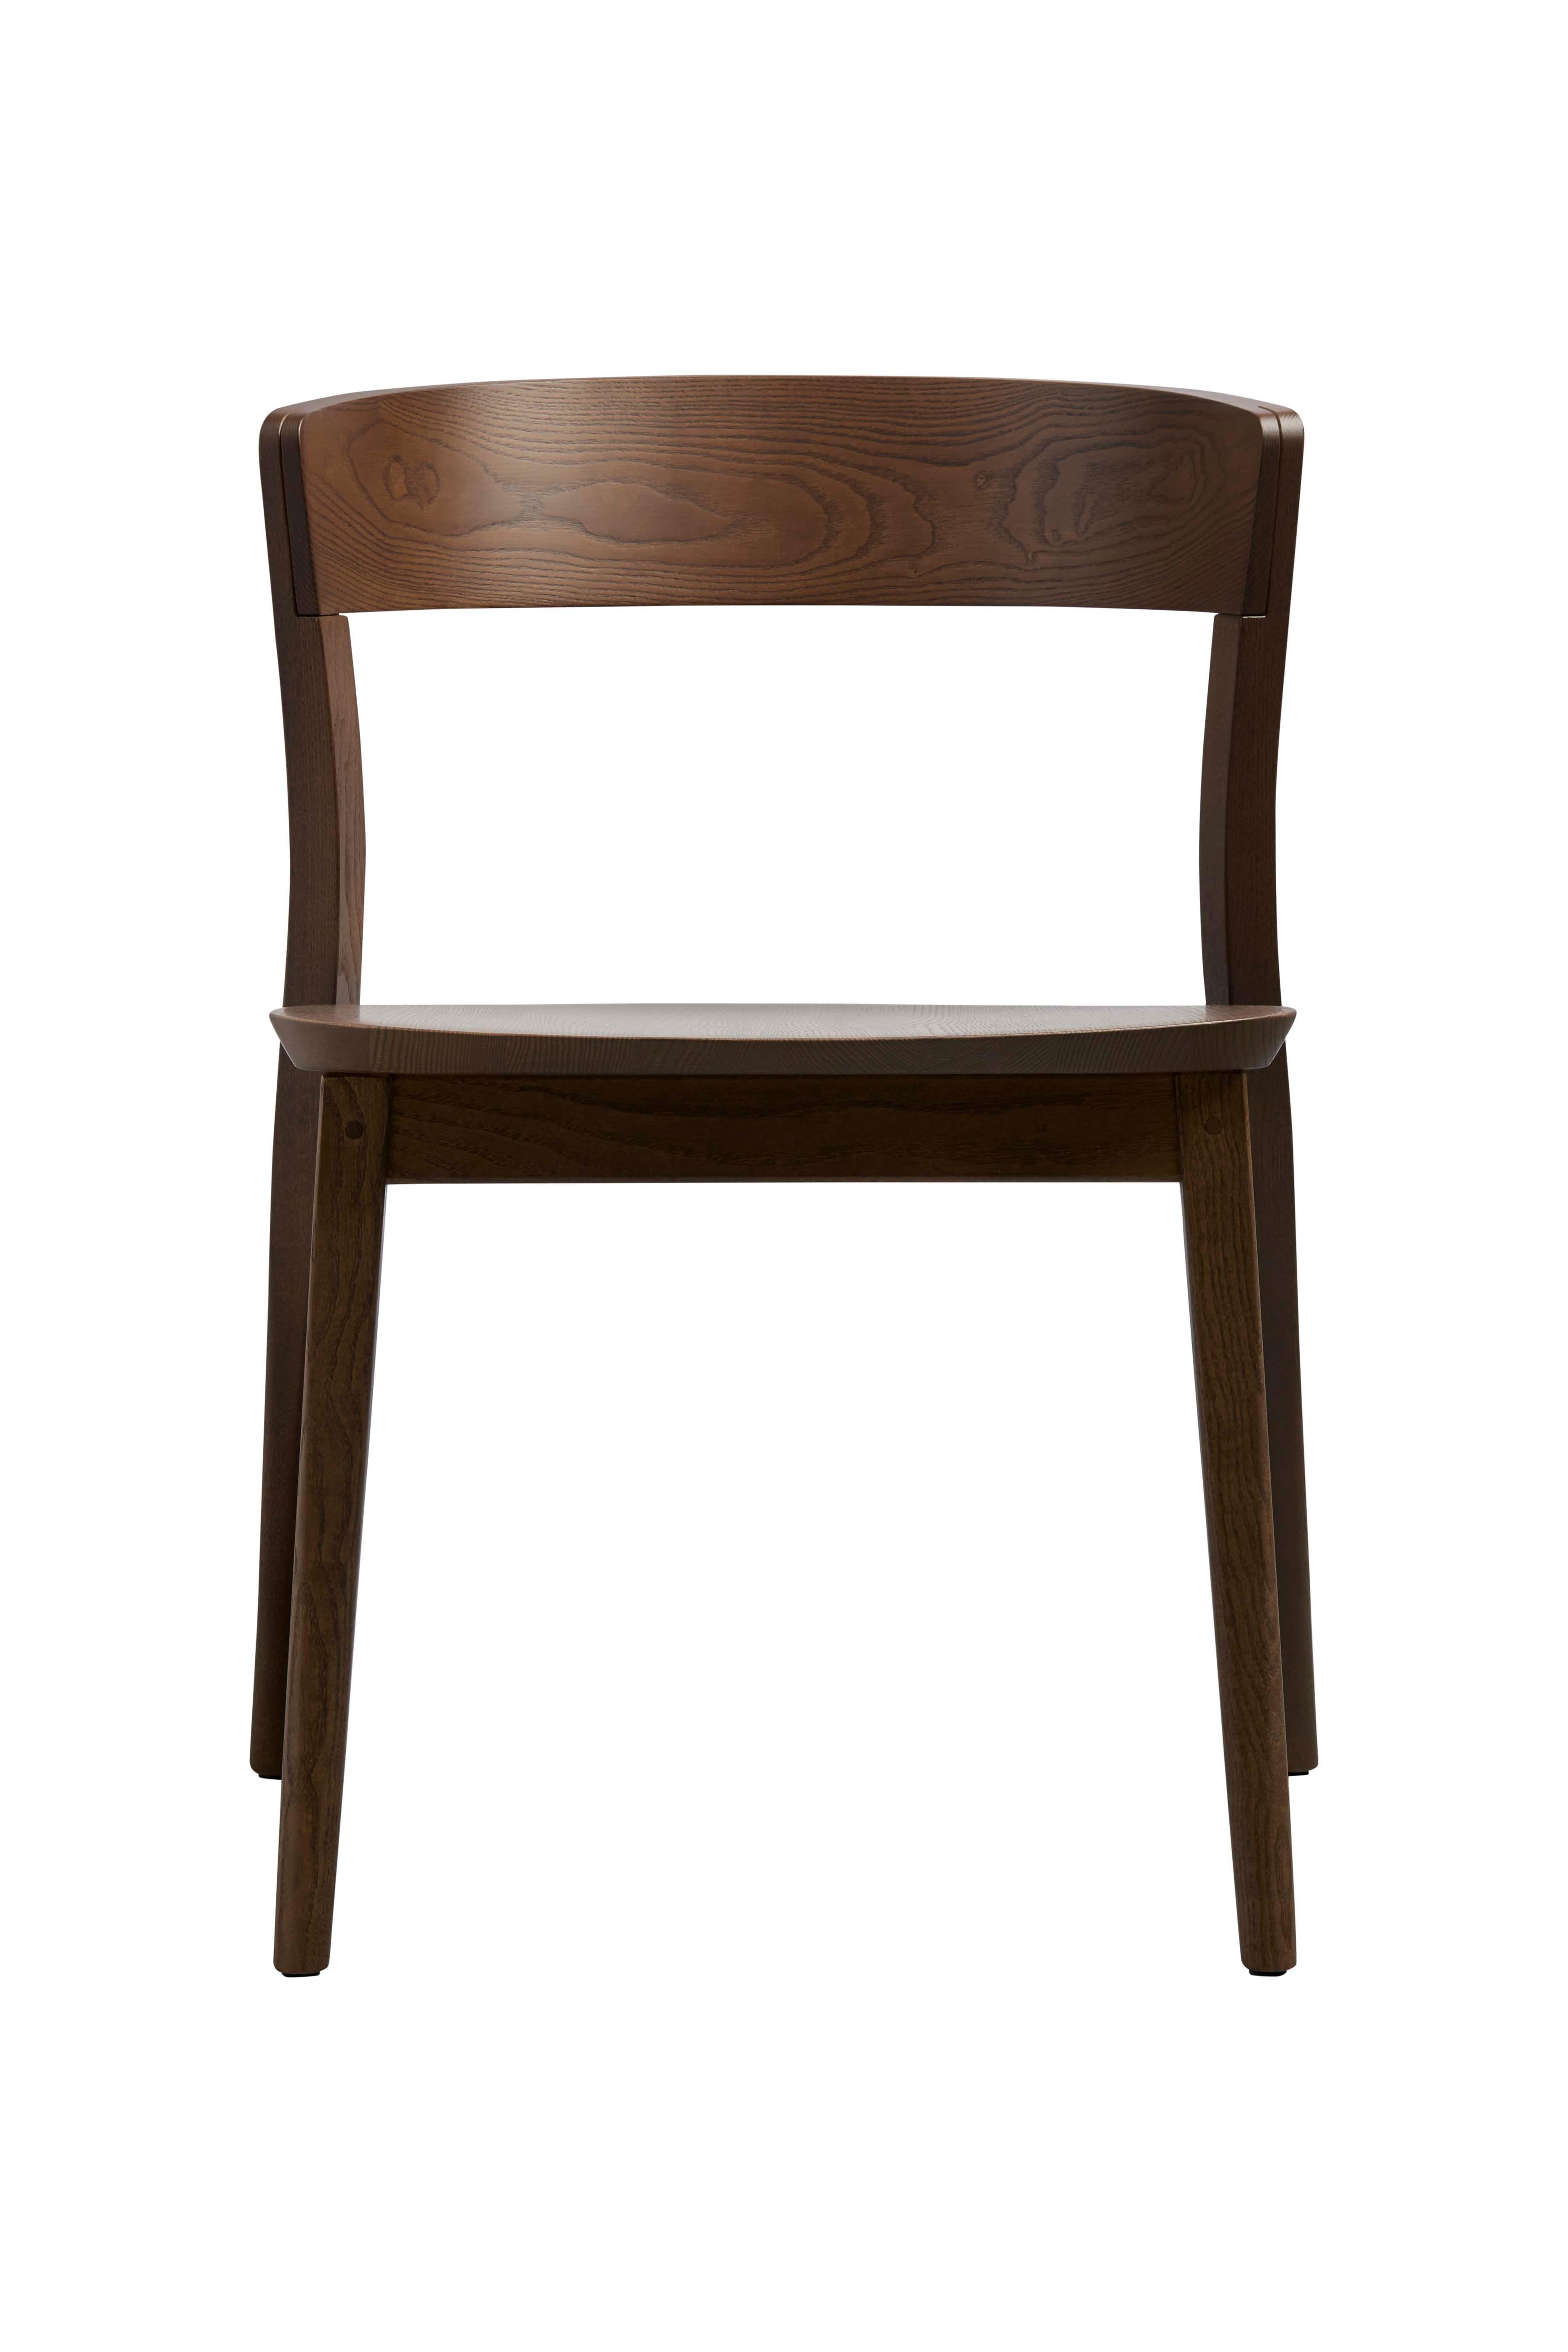 Contemporary interpretation of the classic bistro chair, Clarke was designed for comfort. Made from solid ash, this sculpted piece is defined by fine details and subtle curves and angles. Fine craftsmanship highlights the sculpted solid timber seat